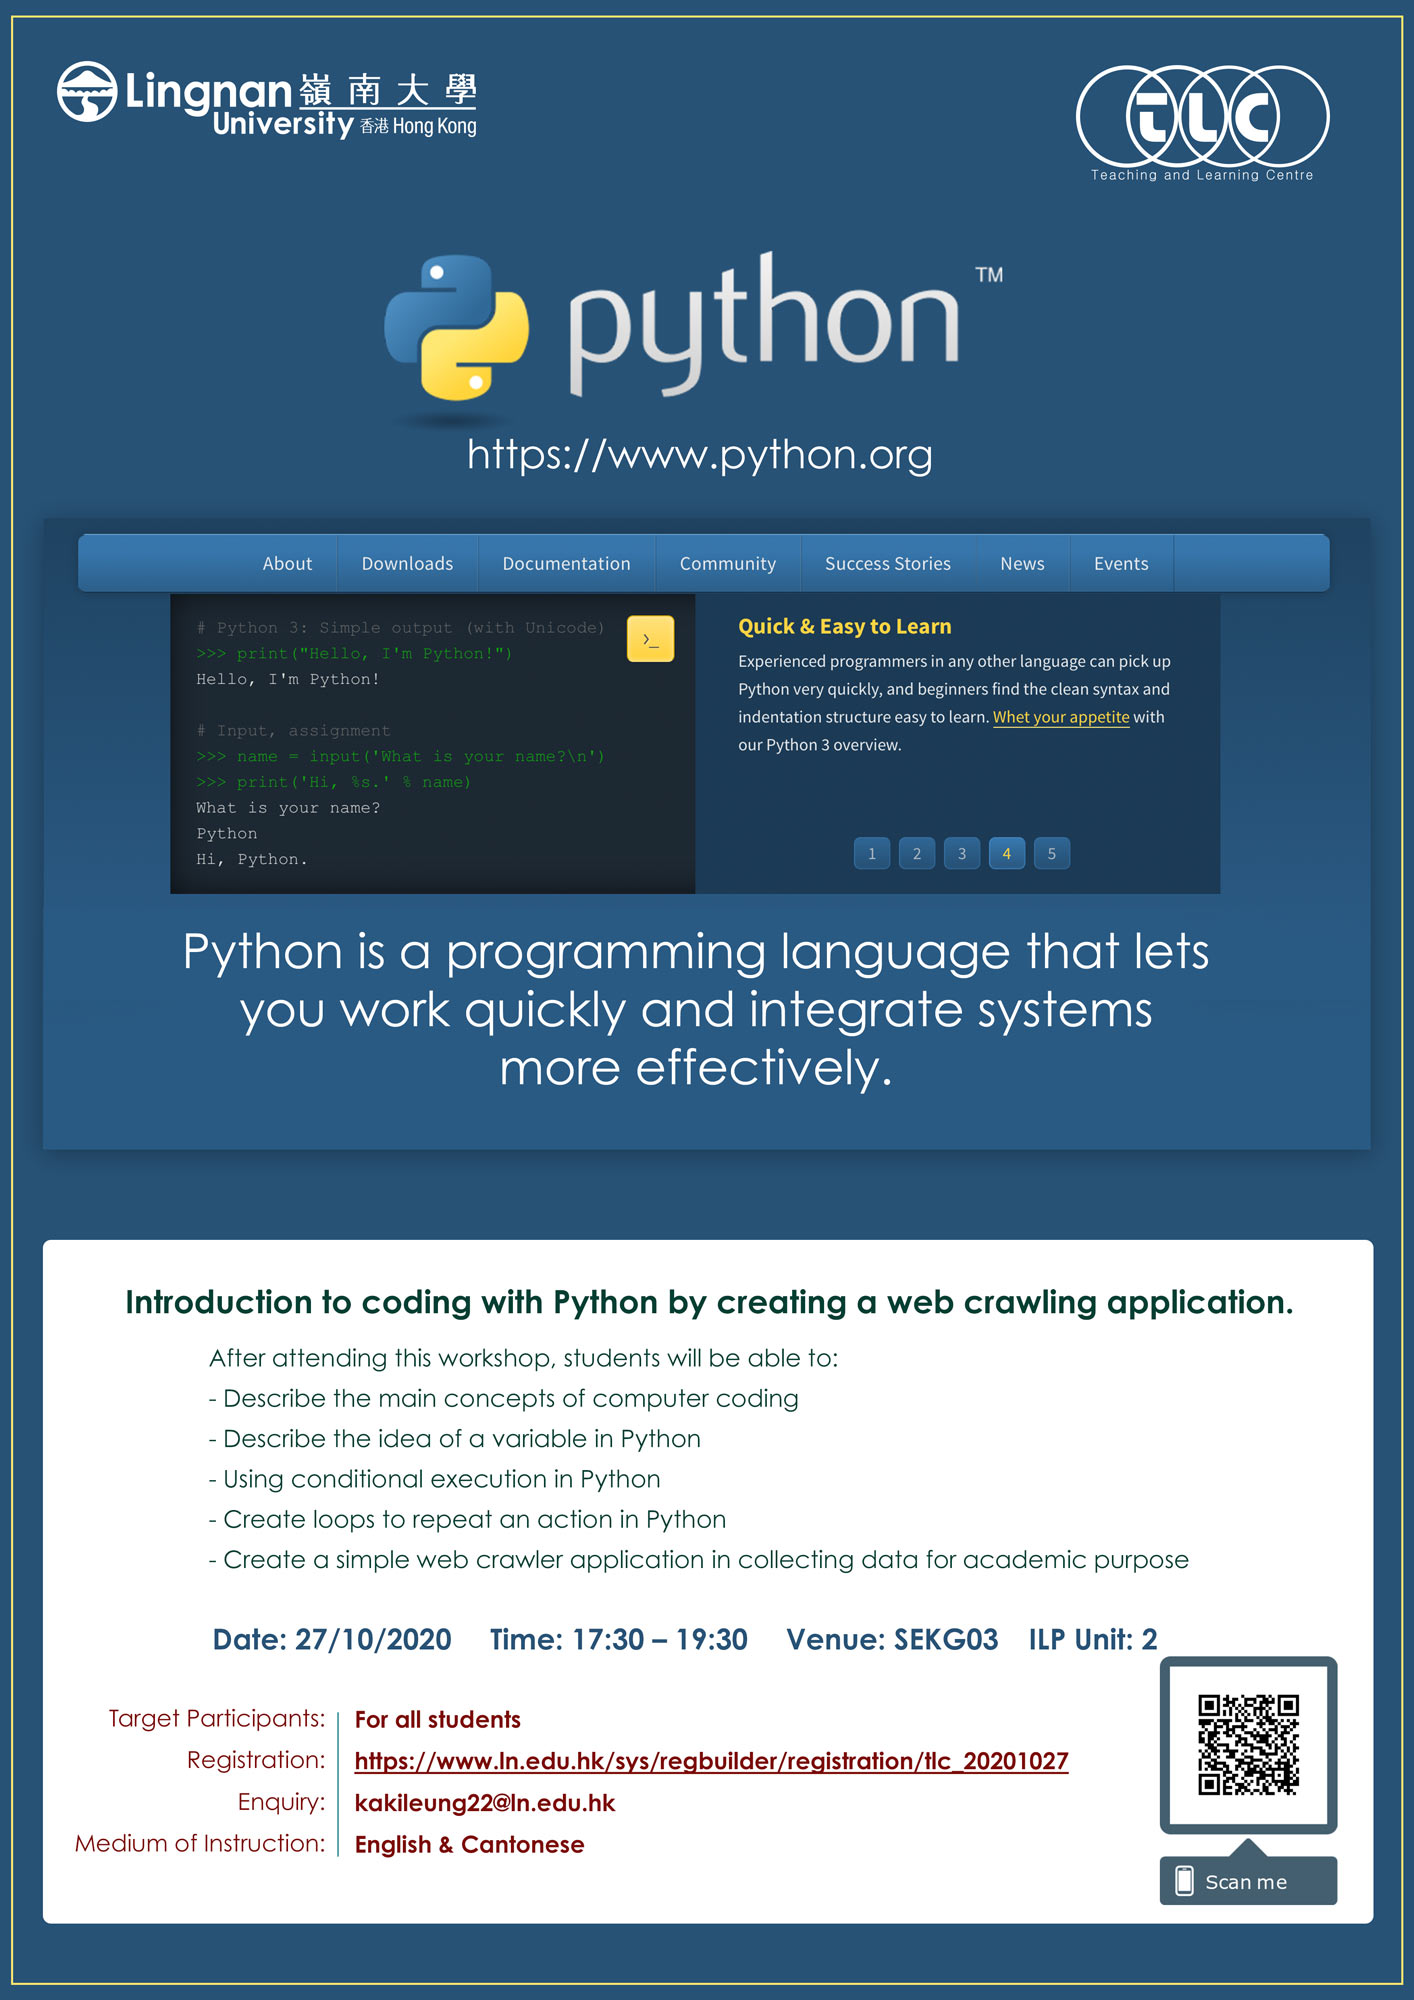 Introduction to Coding with Python by Creating a Web Crawling Application